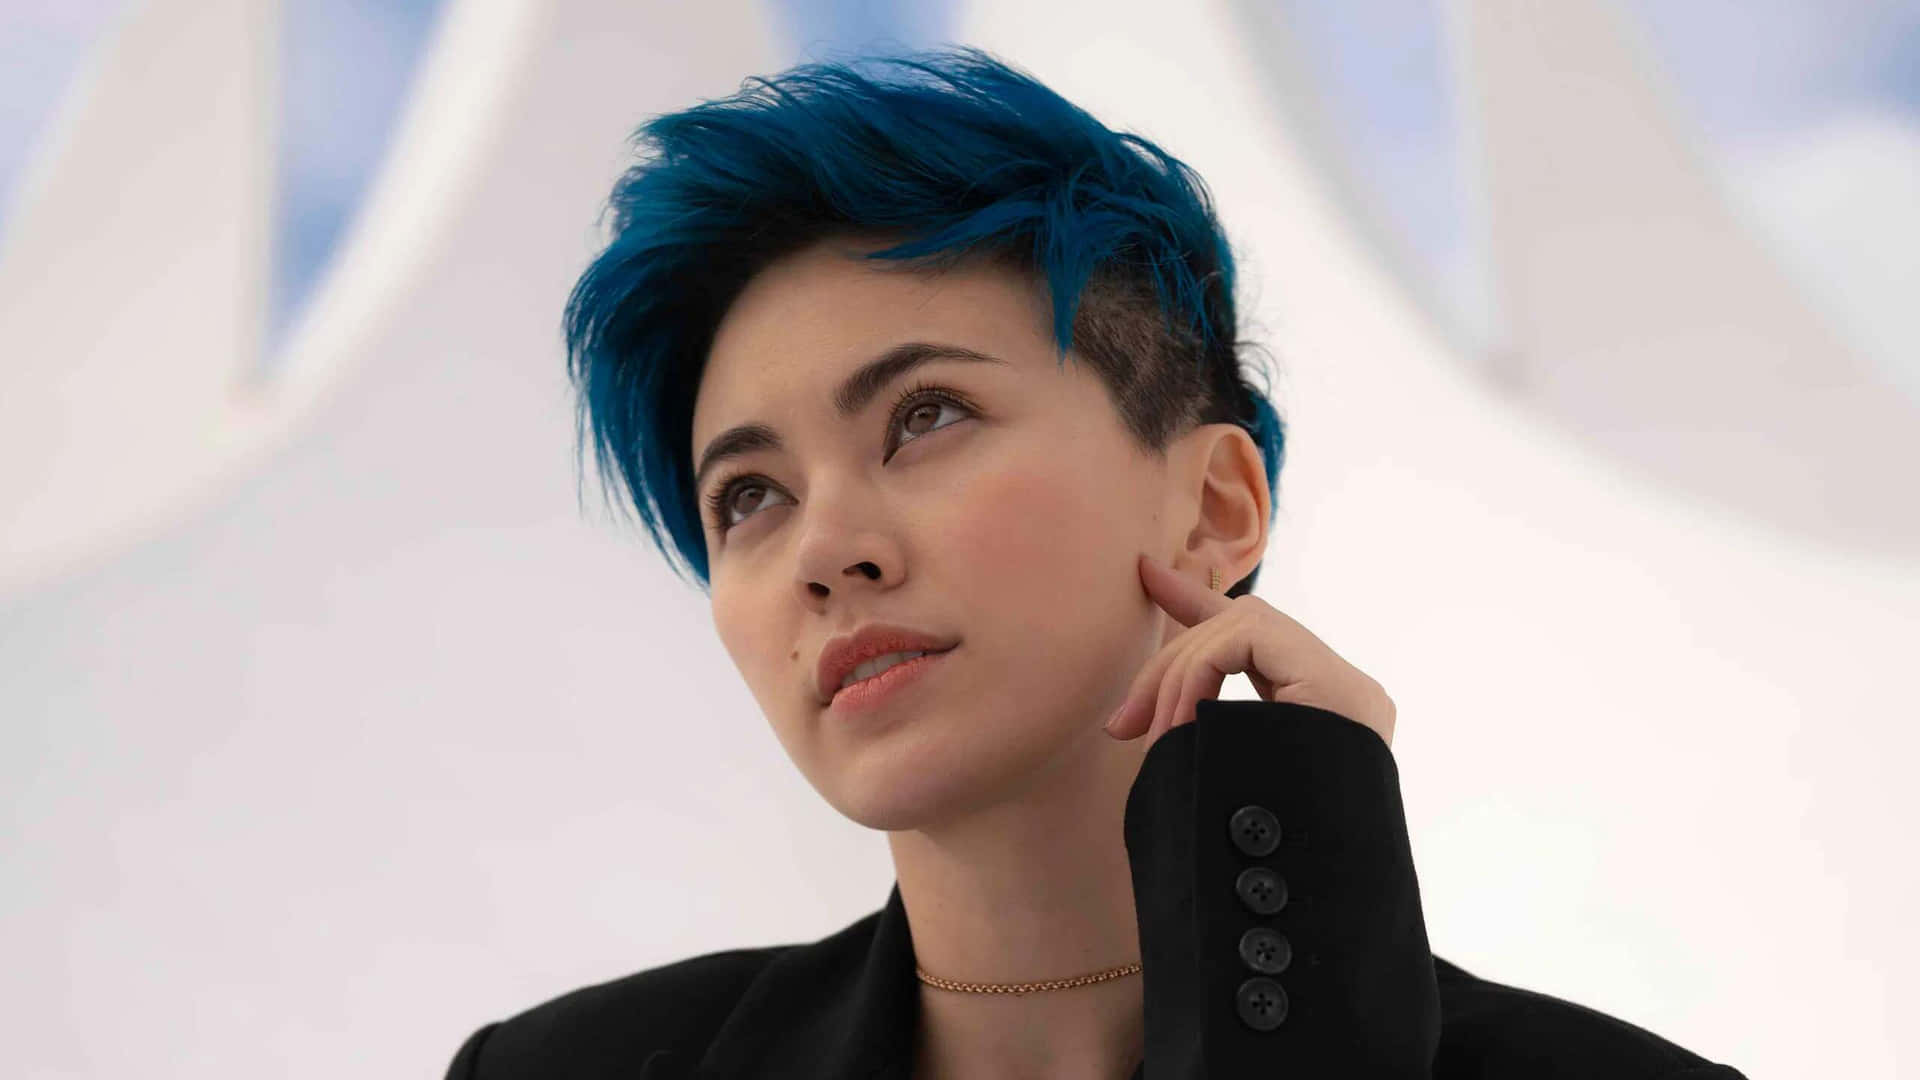 Womanwith Blue Hair Contemplative Look Wallpaper